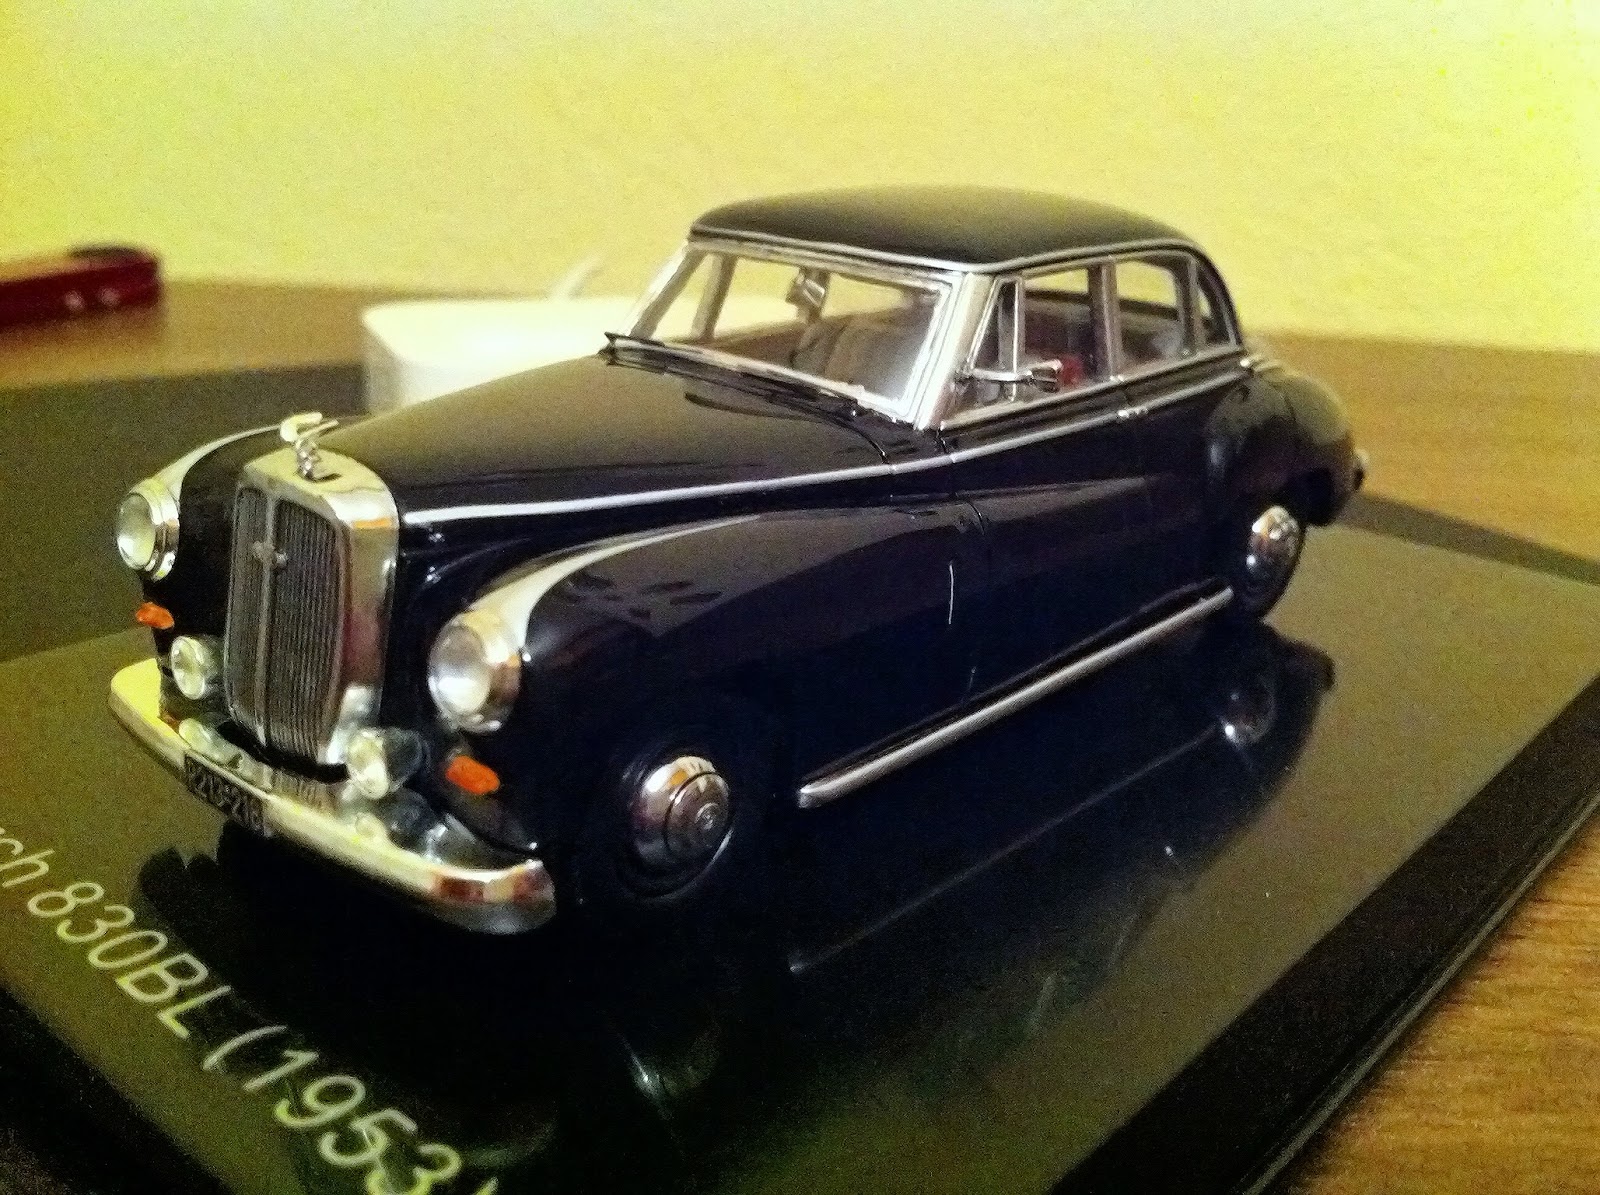 The AUDI side of my life: Scale model: Horch 830BL